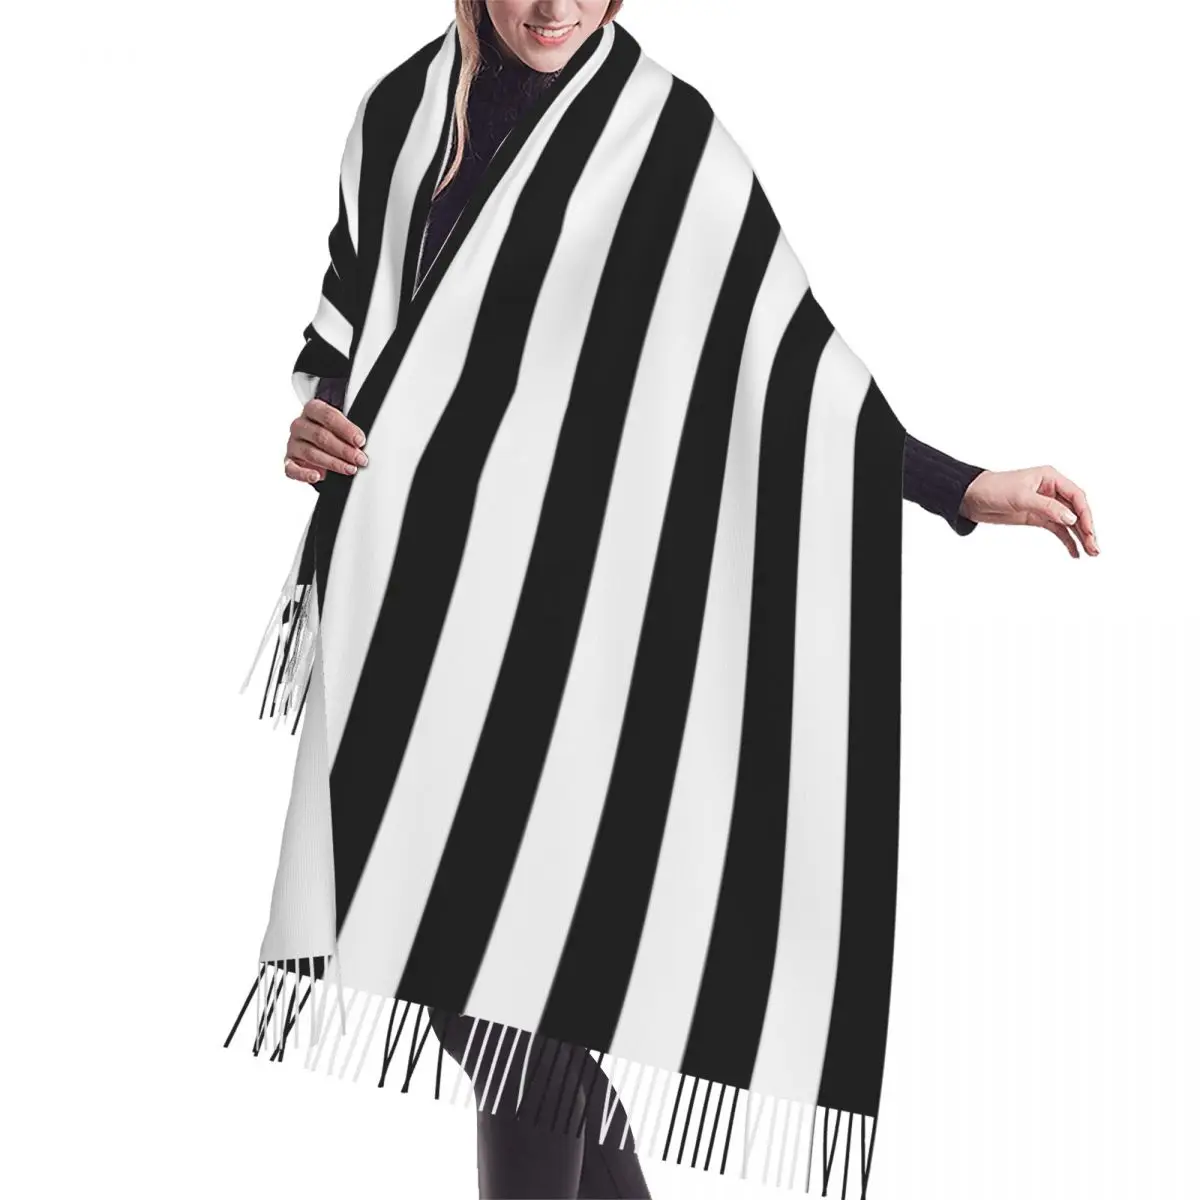 

Lady French Toile De Jouy Striped Black And White Scarves Women Winter Soft Warm Tassel Shawl Wrap Traditional France Art Scarf